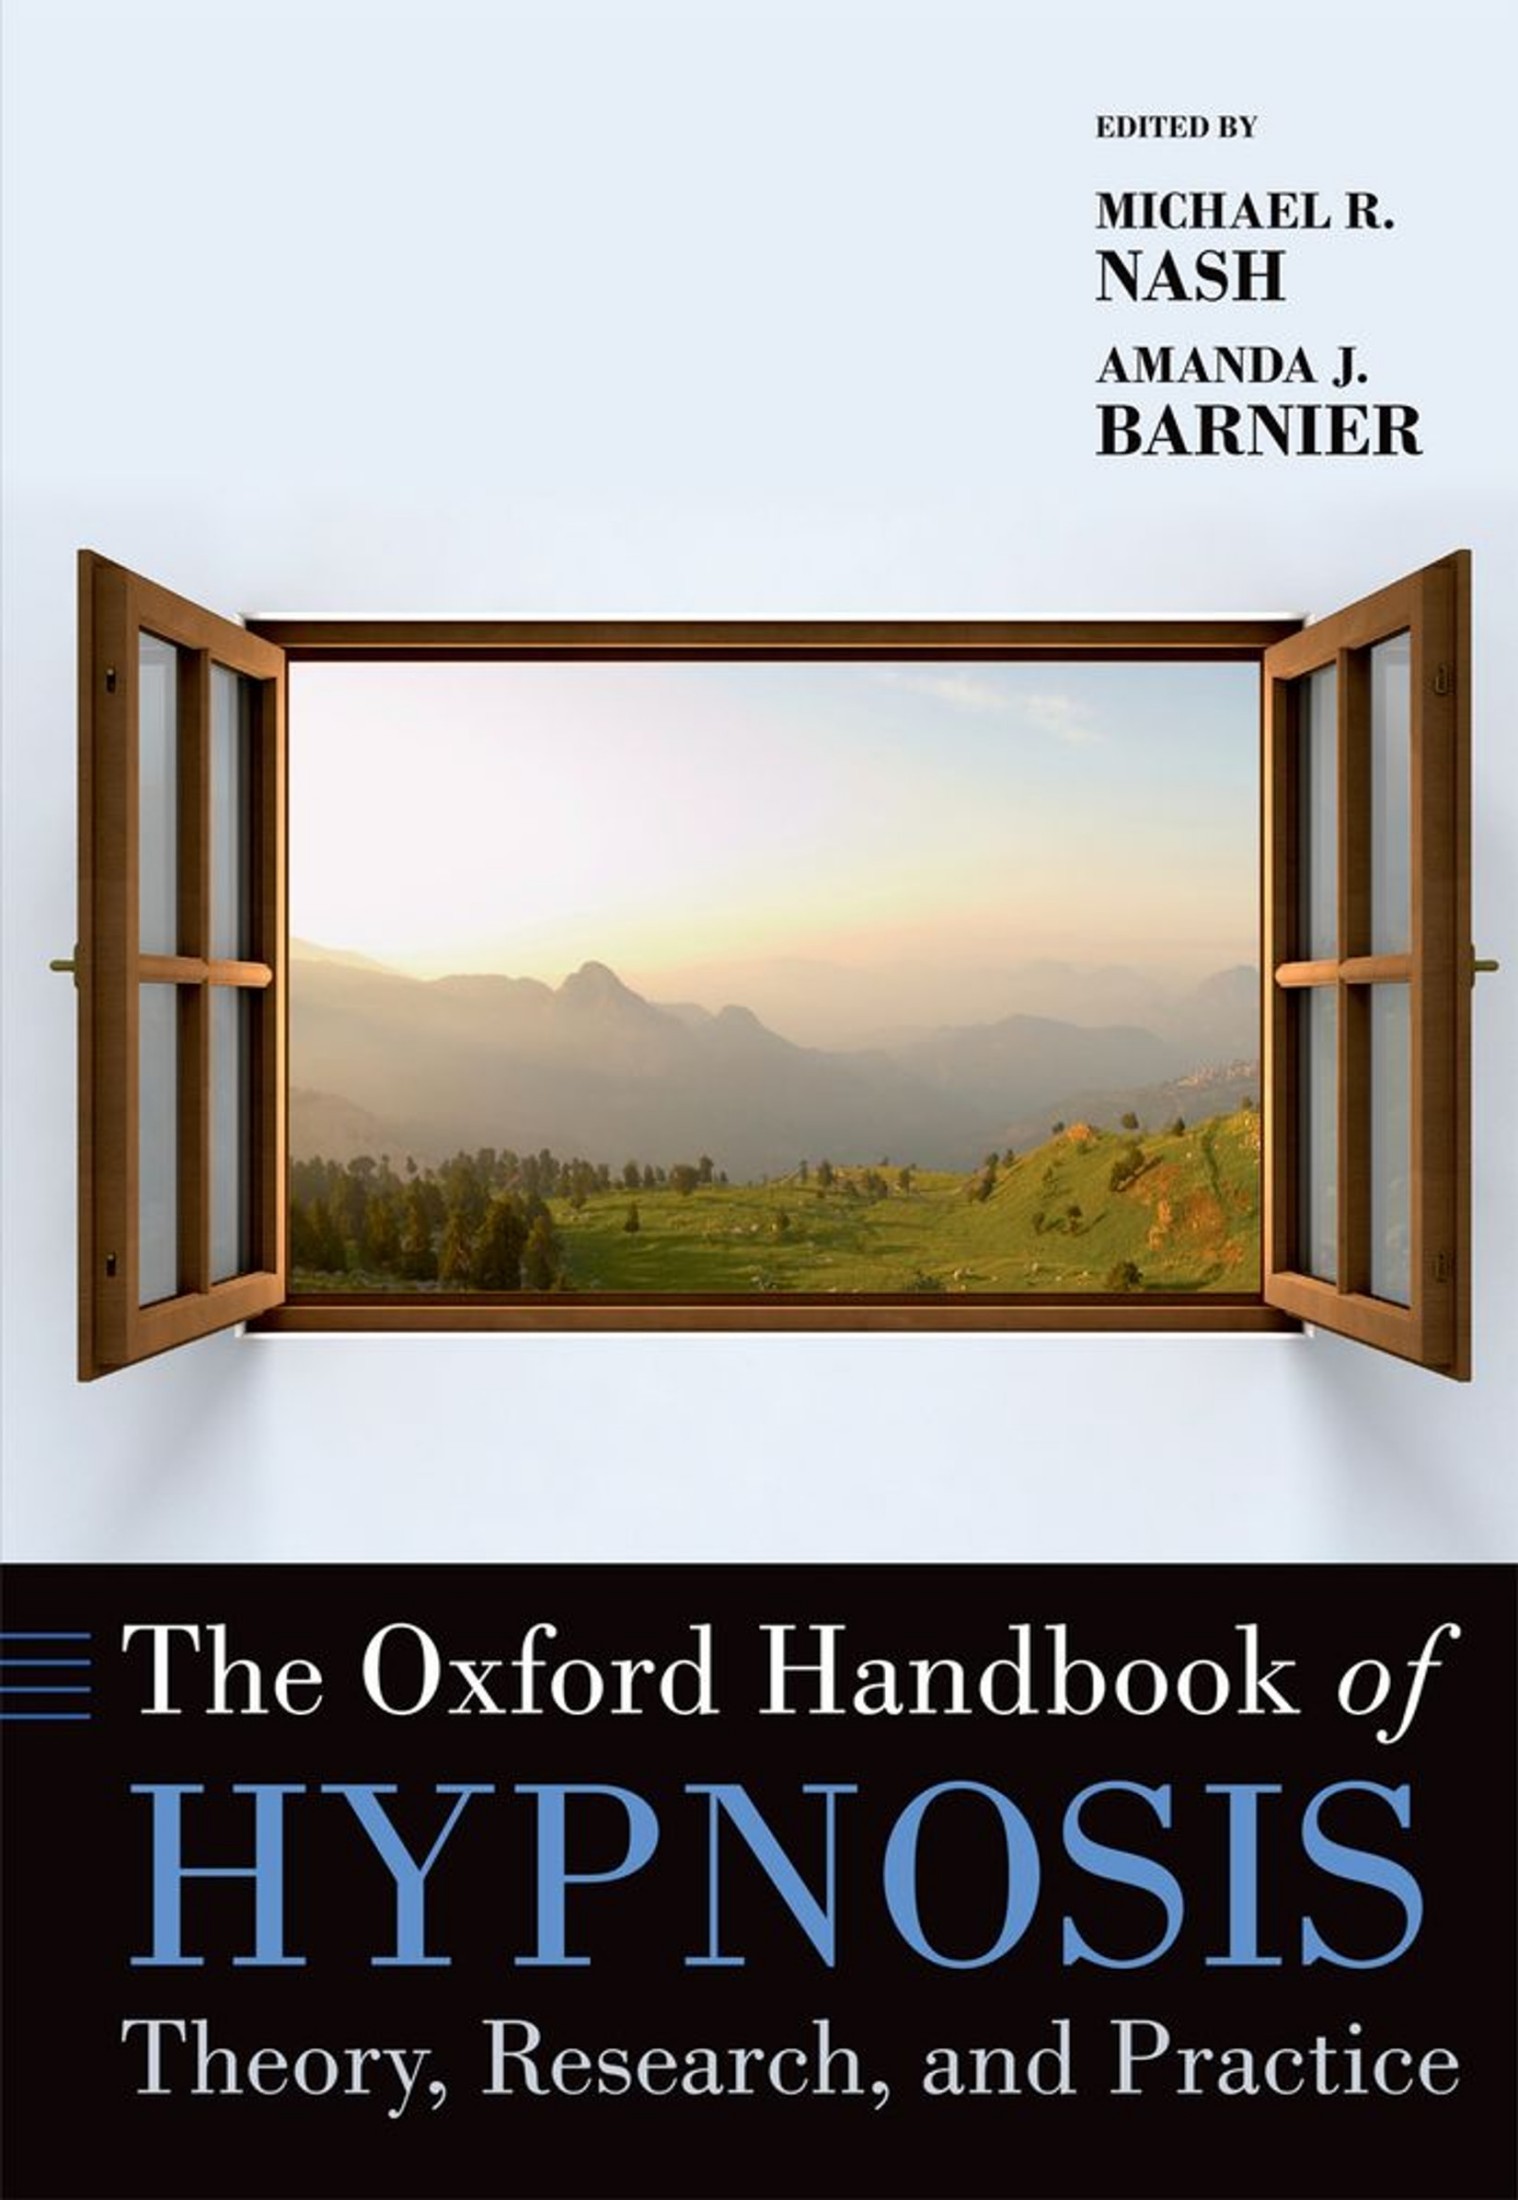 The Oxford Handbook of Hypnosis: Theory, Research, and Practice